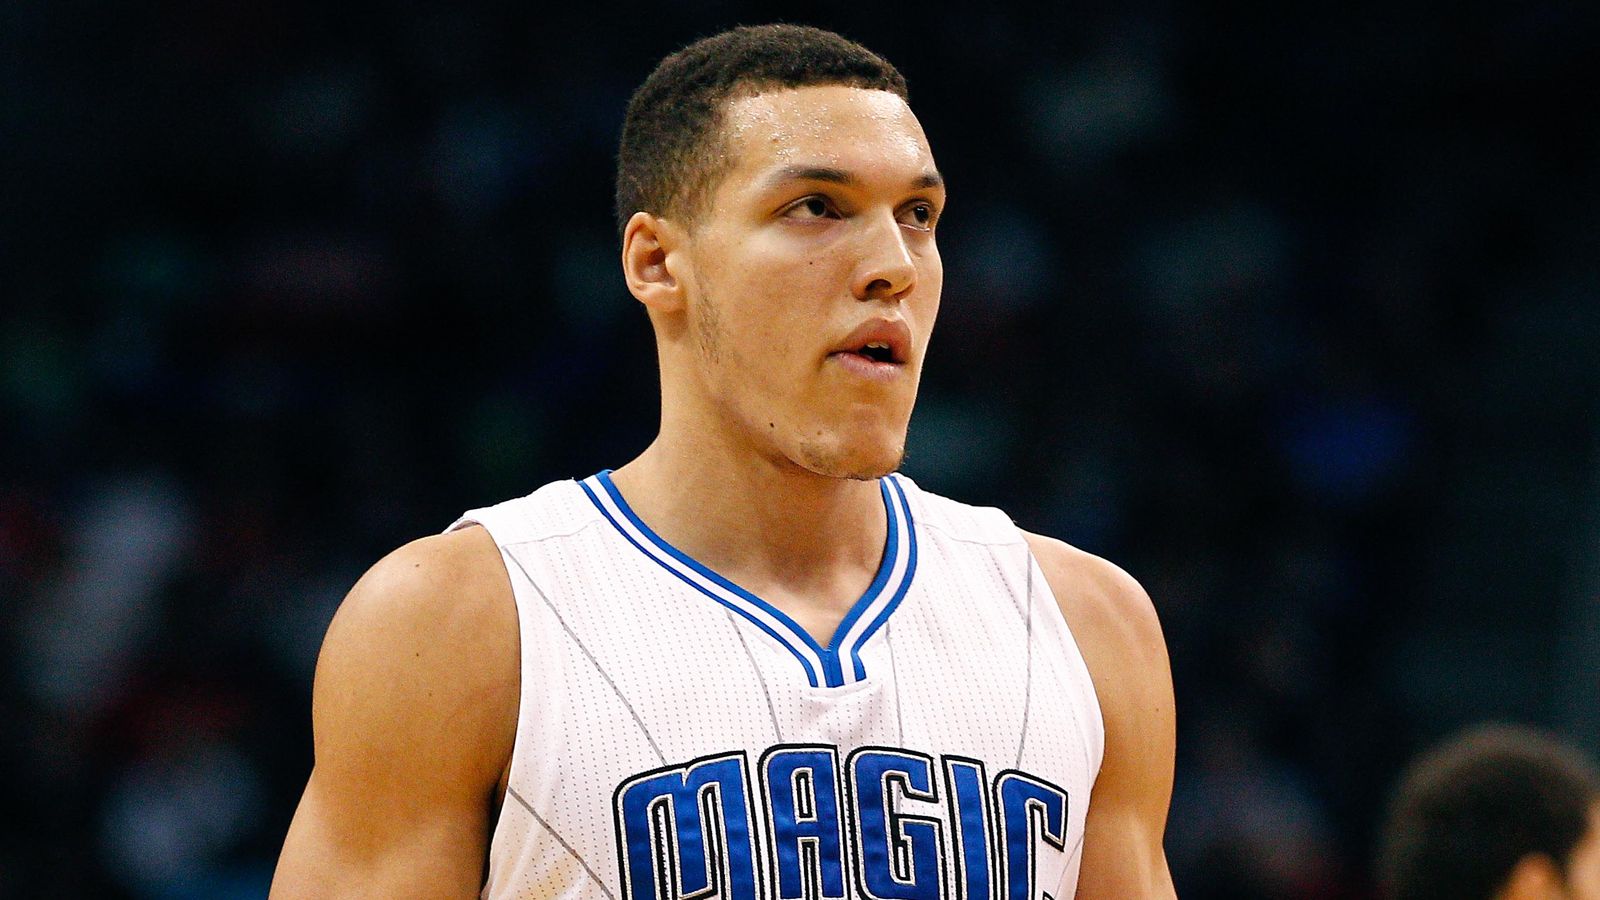 VIDEO: Aaron Gordon Doesn’t Think the Dunk Contest Ended Yet